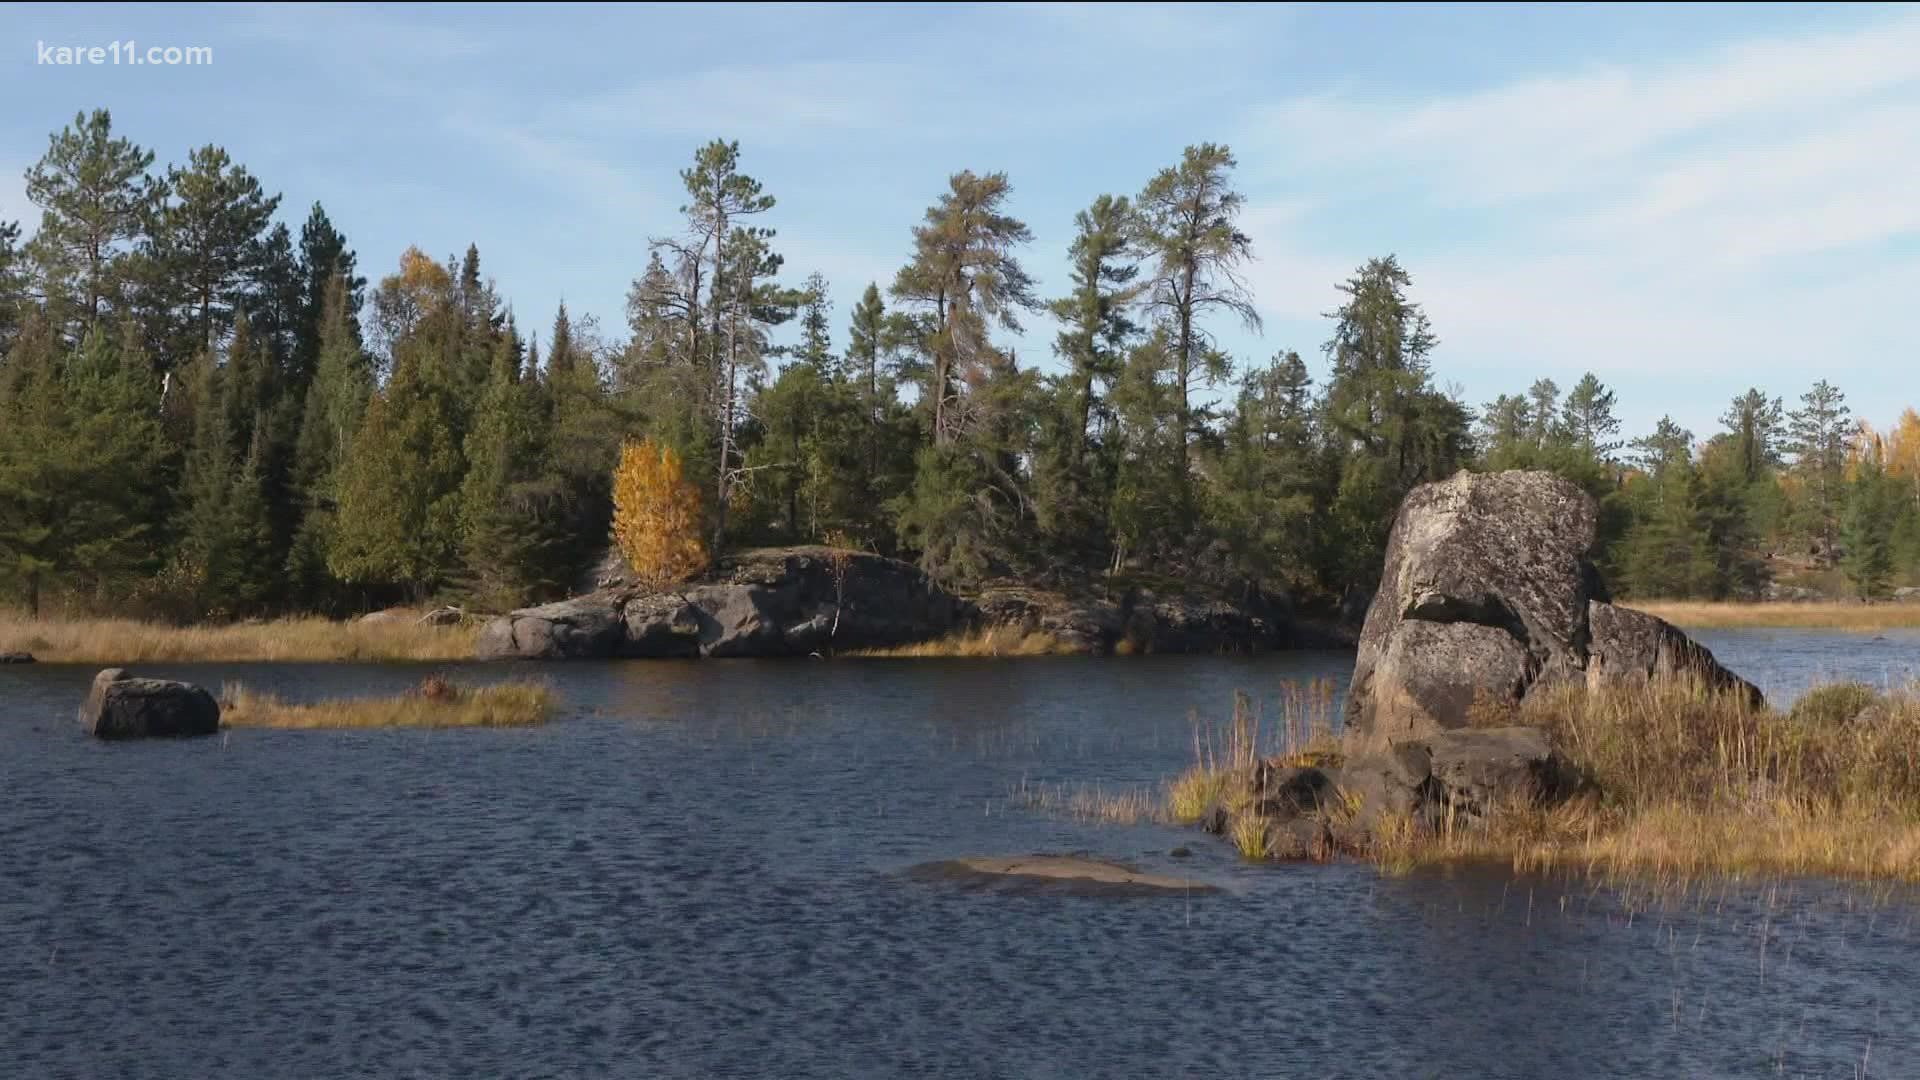 The government ordered a study Wednesday that could lead to a 20-year ban on mining upstream from the BWCA Wilderness.